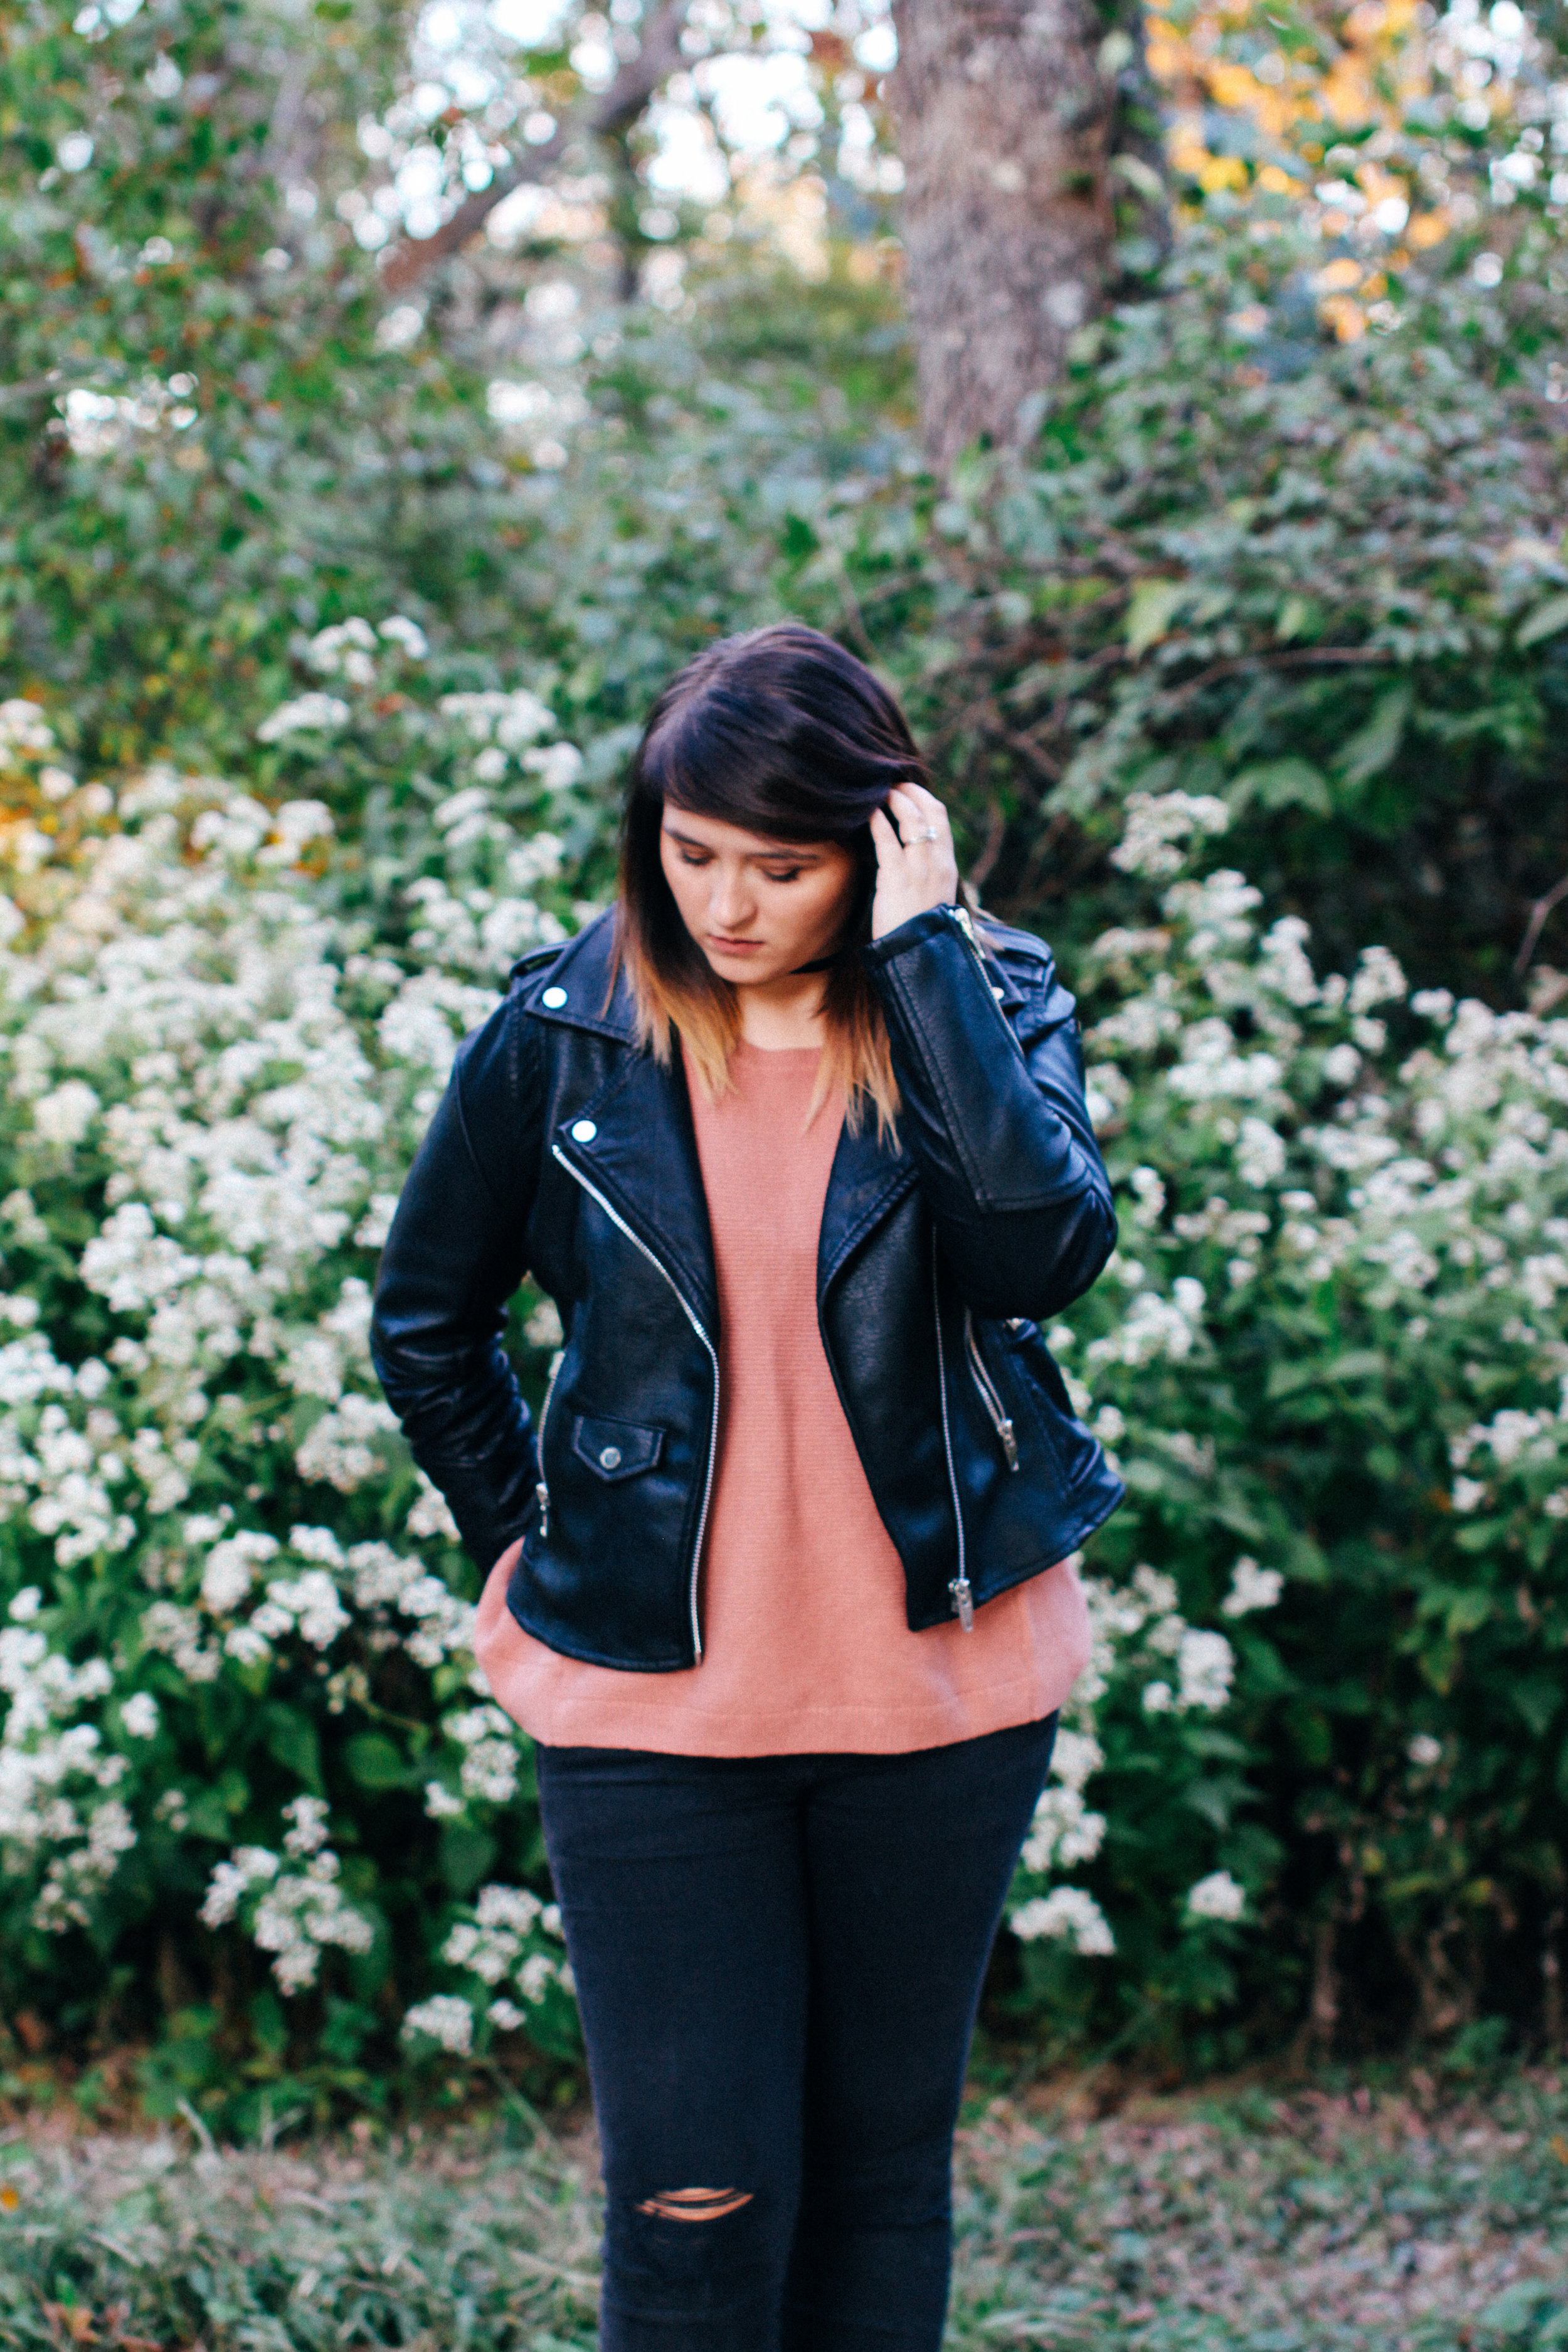 Leather + Blush ft @urbanoutfitters @nordstrom @madewell via chelceytate.com